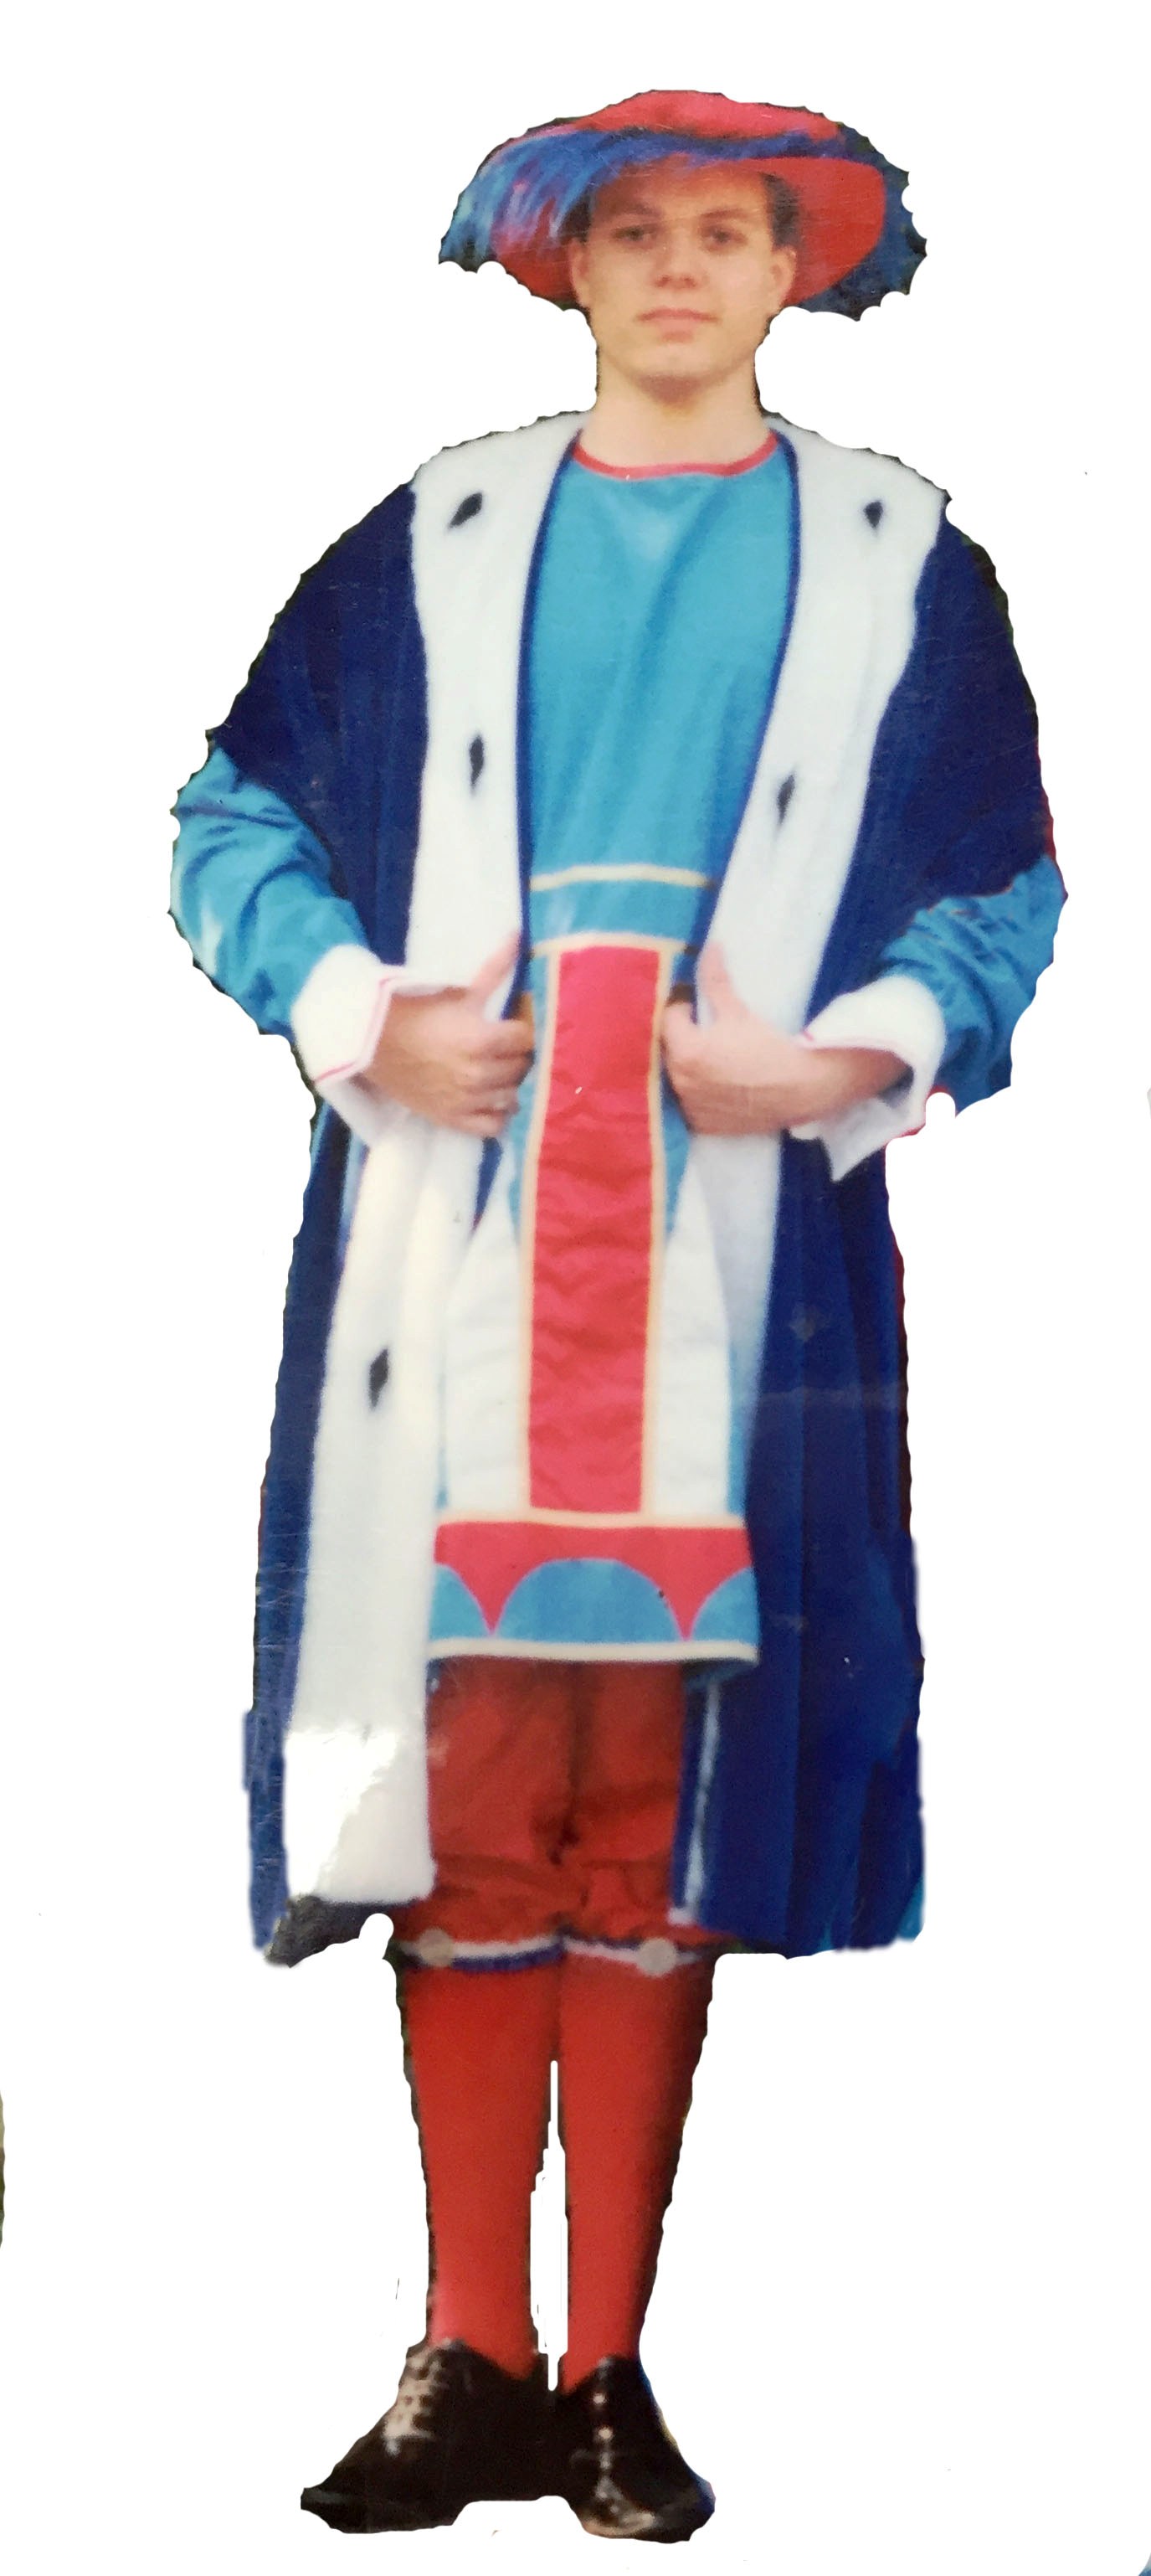 Blue_King_of_Hearts_Costume